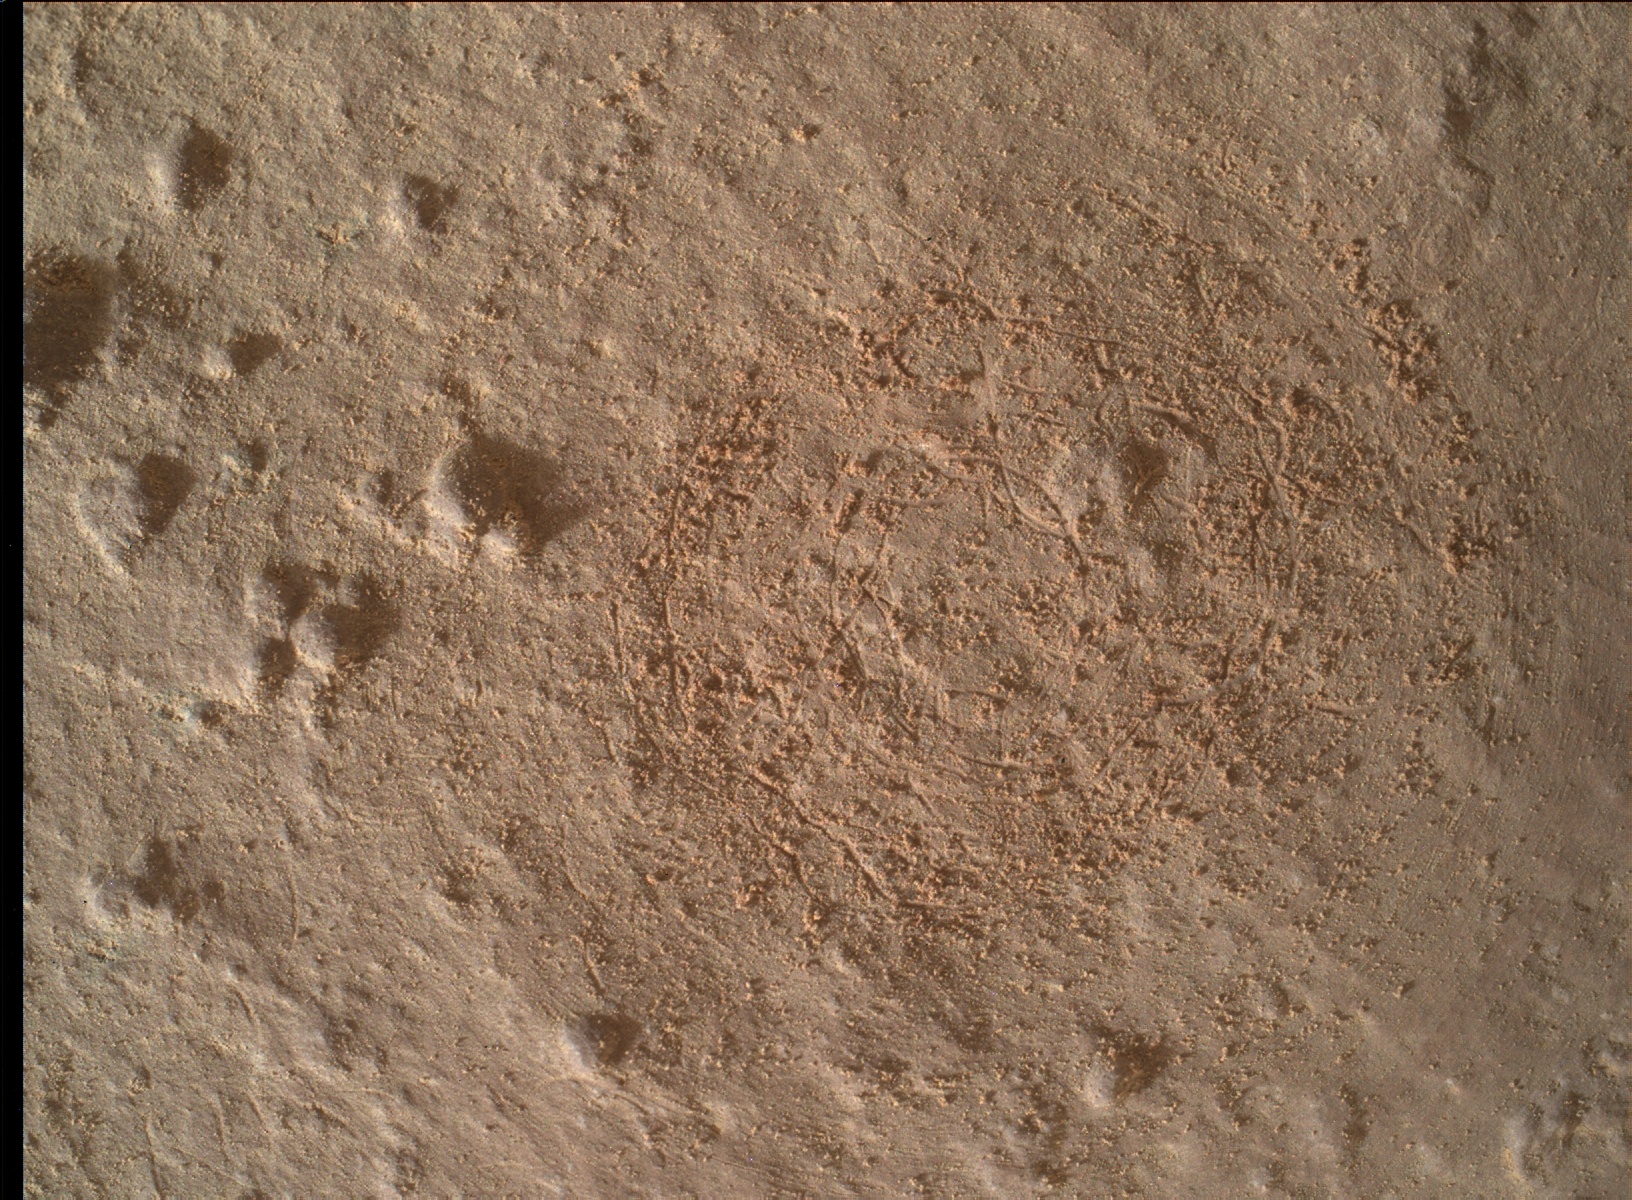 Nasa's Mars rover Curiosity acquired this image using its Mars Hand Lens Imager (MAHLI) on Sol 1444